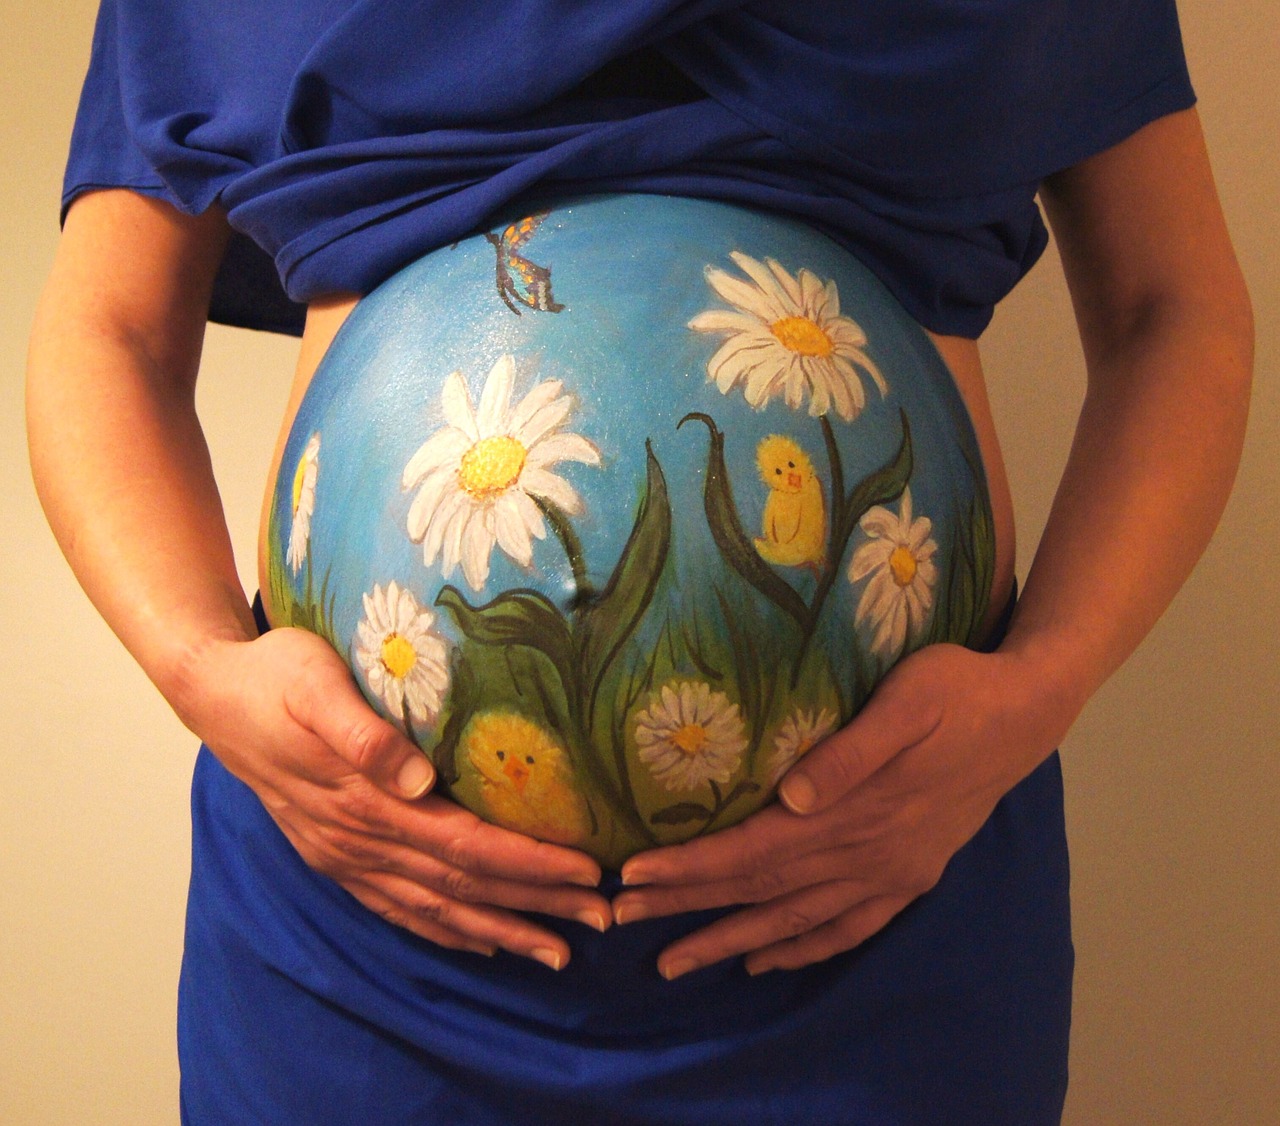 bellypaint belly painting pregnant free photo